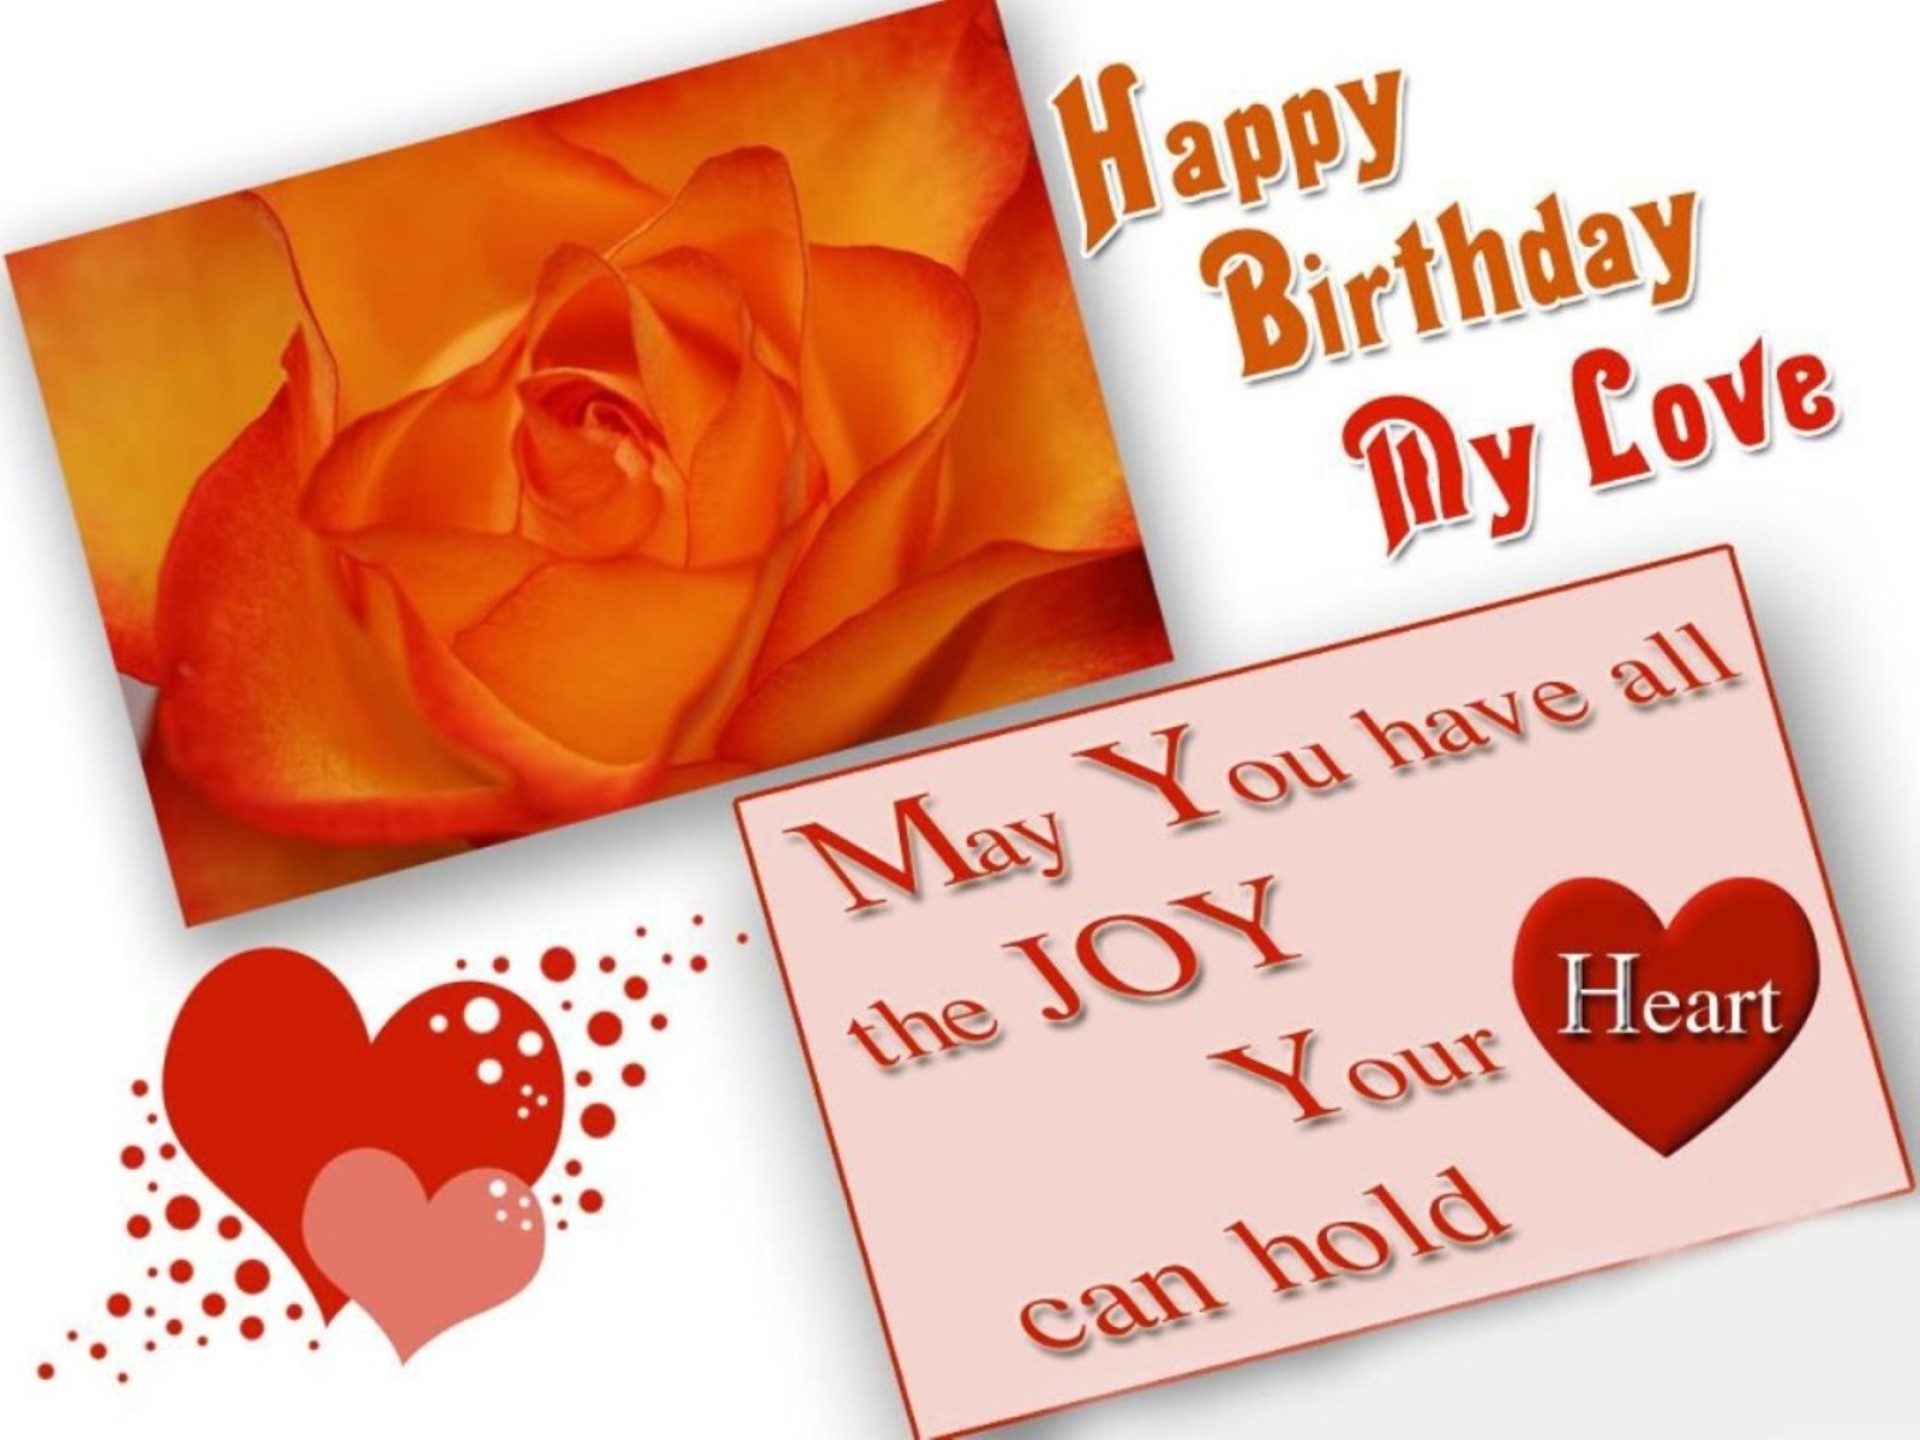 The Collection of Romantic Birthday Wishes That Can Make Your Wife Touched 3